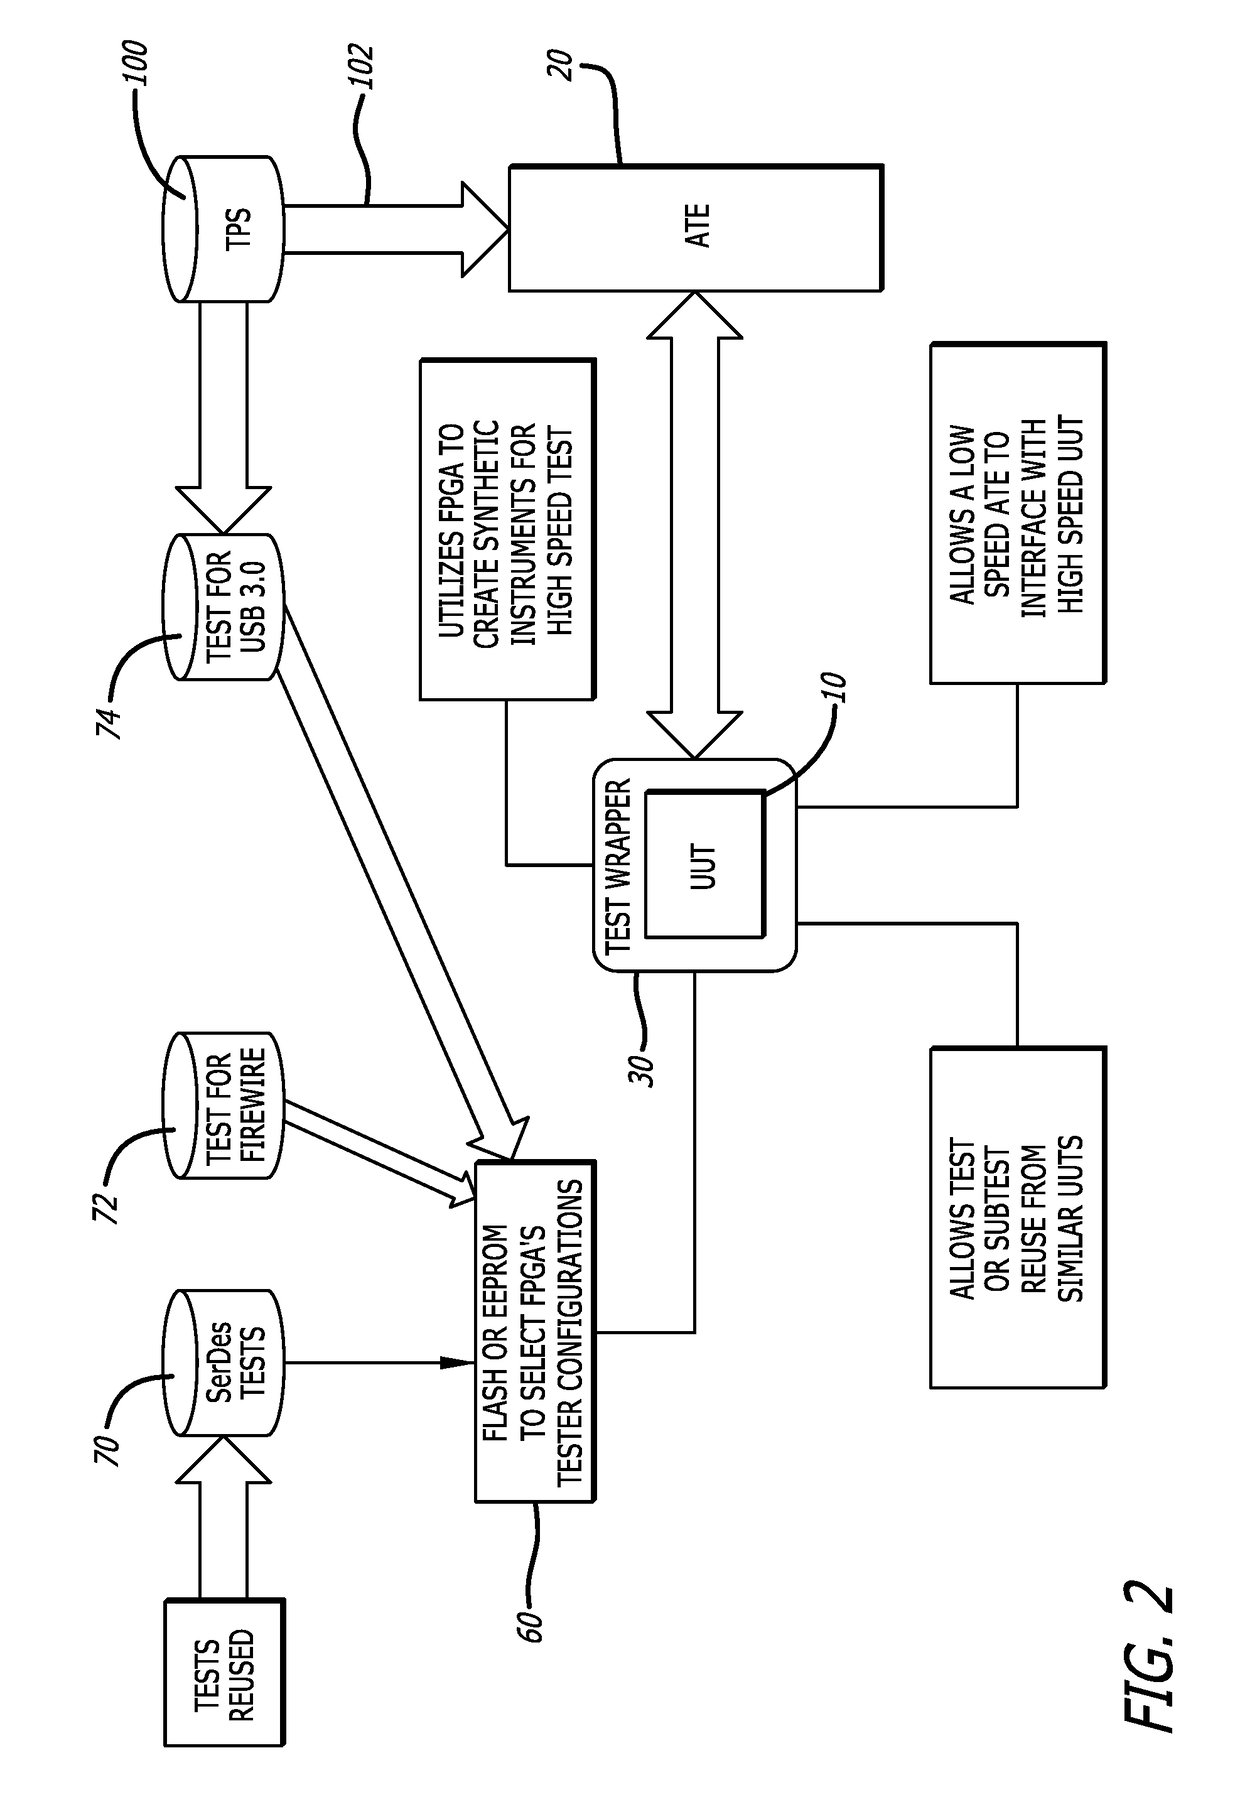 Systems and methods for dynamically reconfiguring automatic test equipment